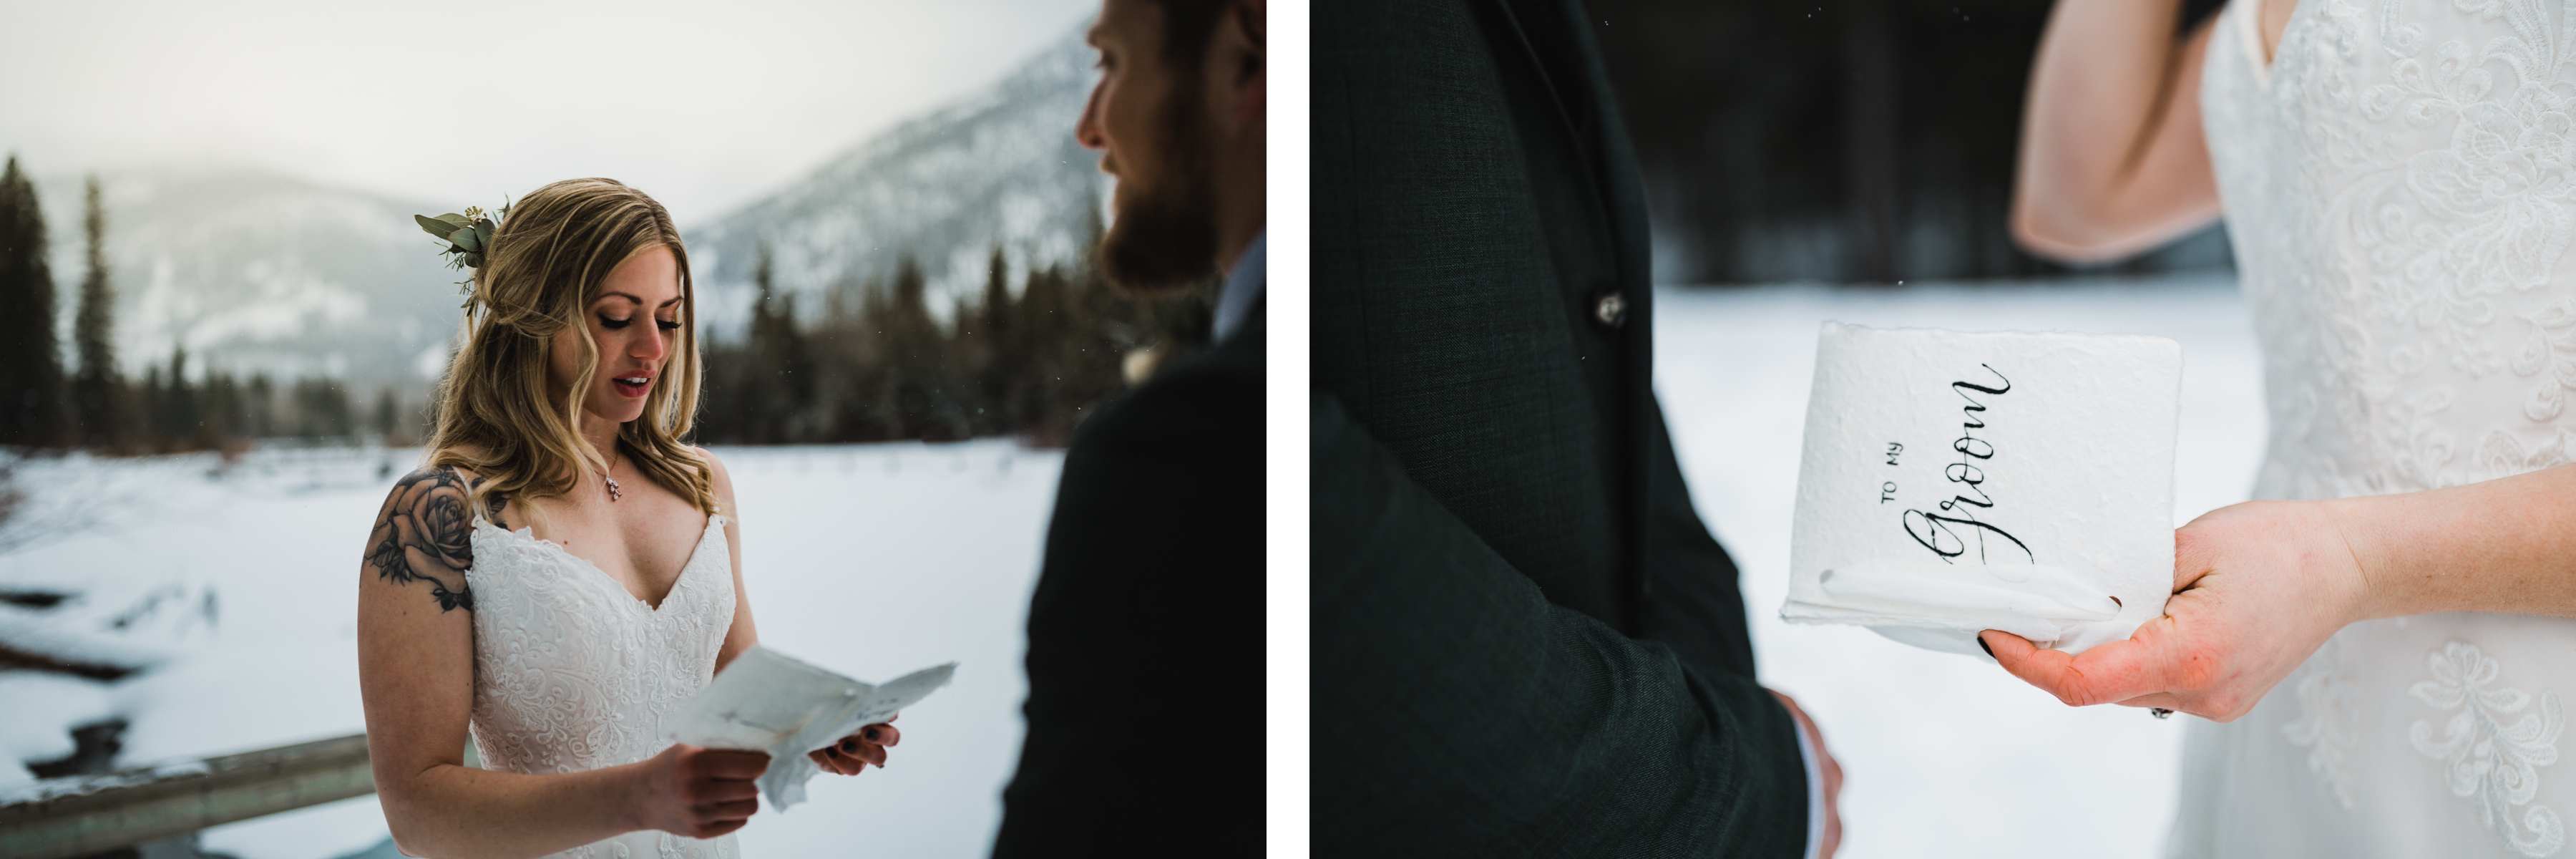 Canmore Elopement Photographer in the Canadian Rockies - Image 24